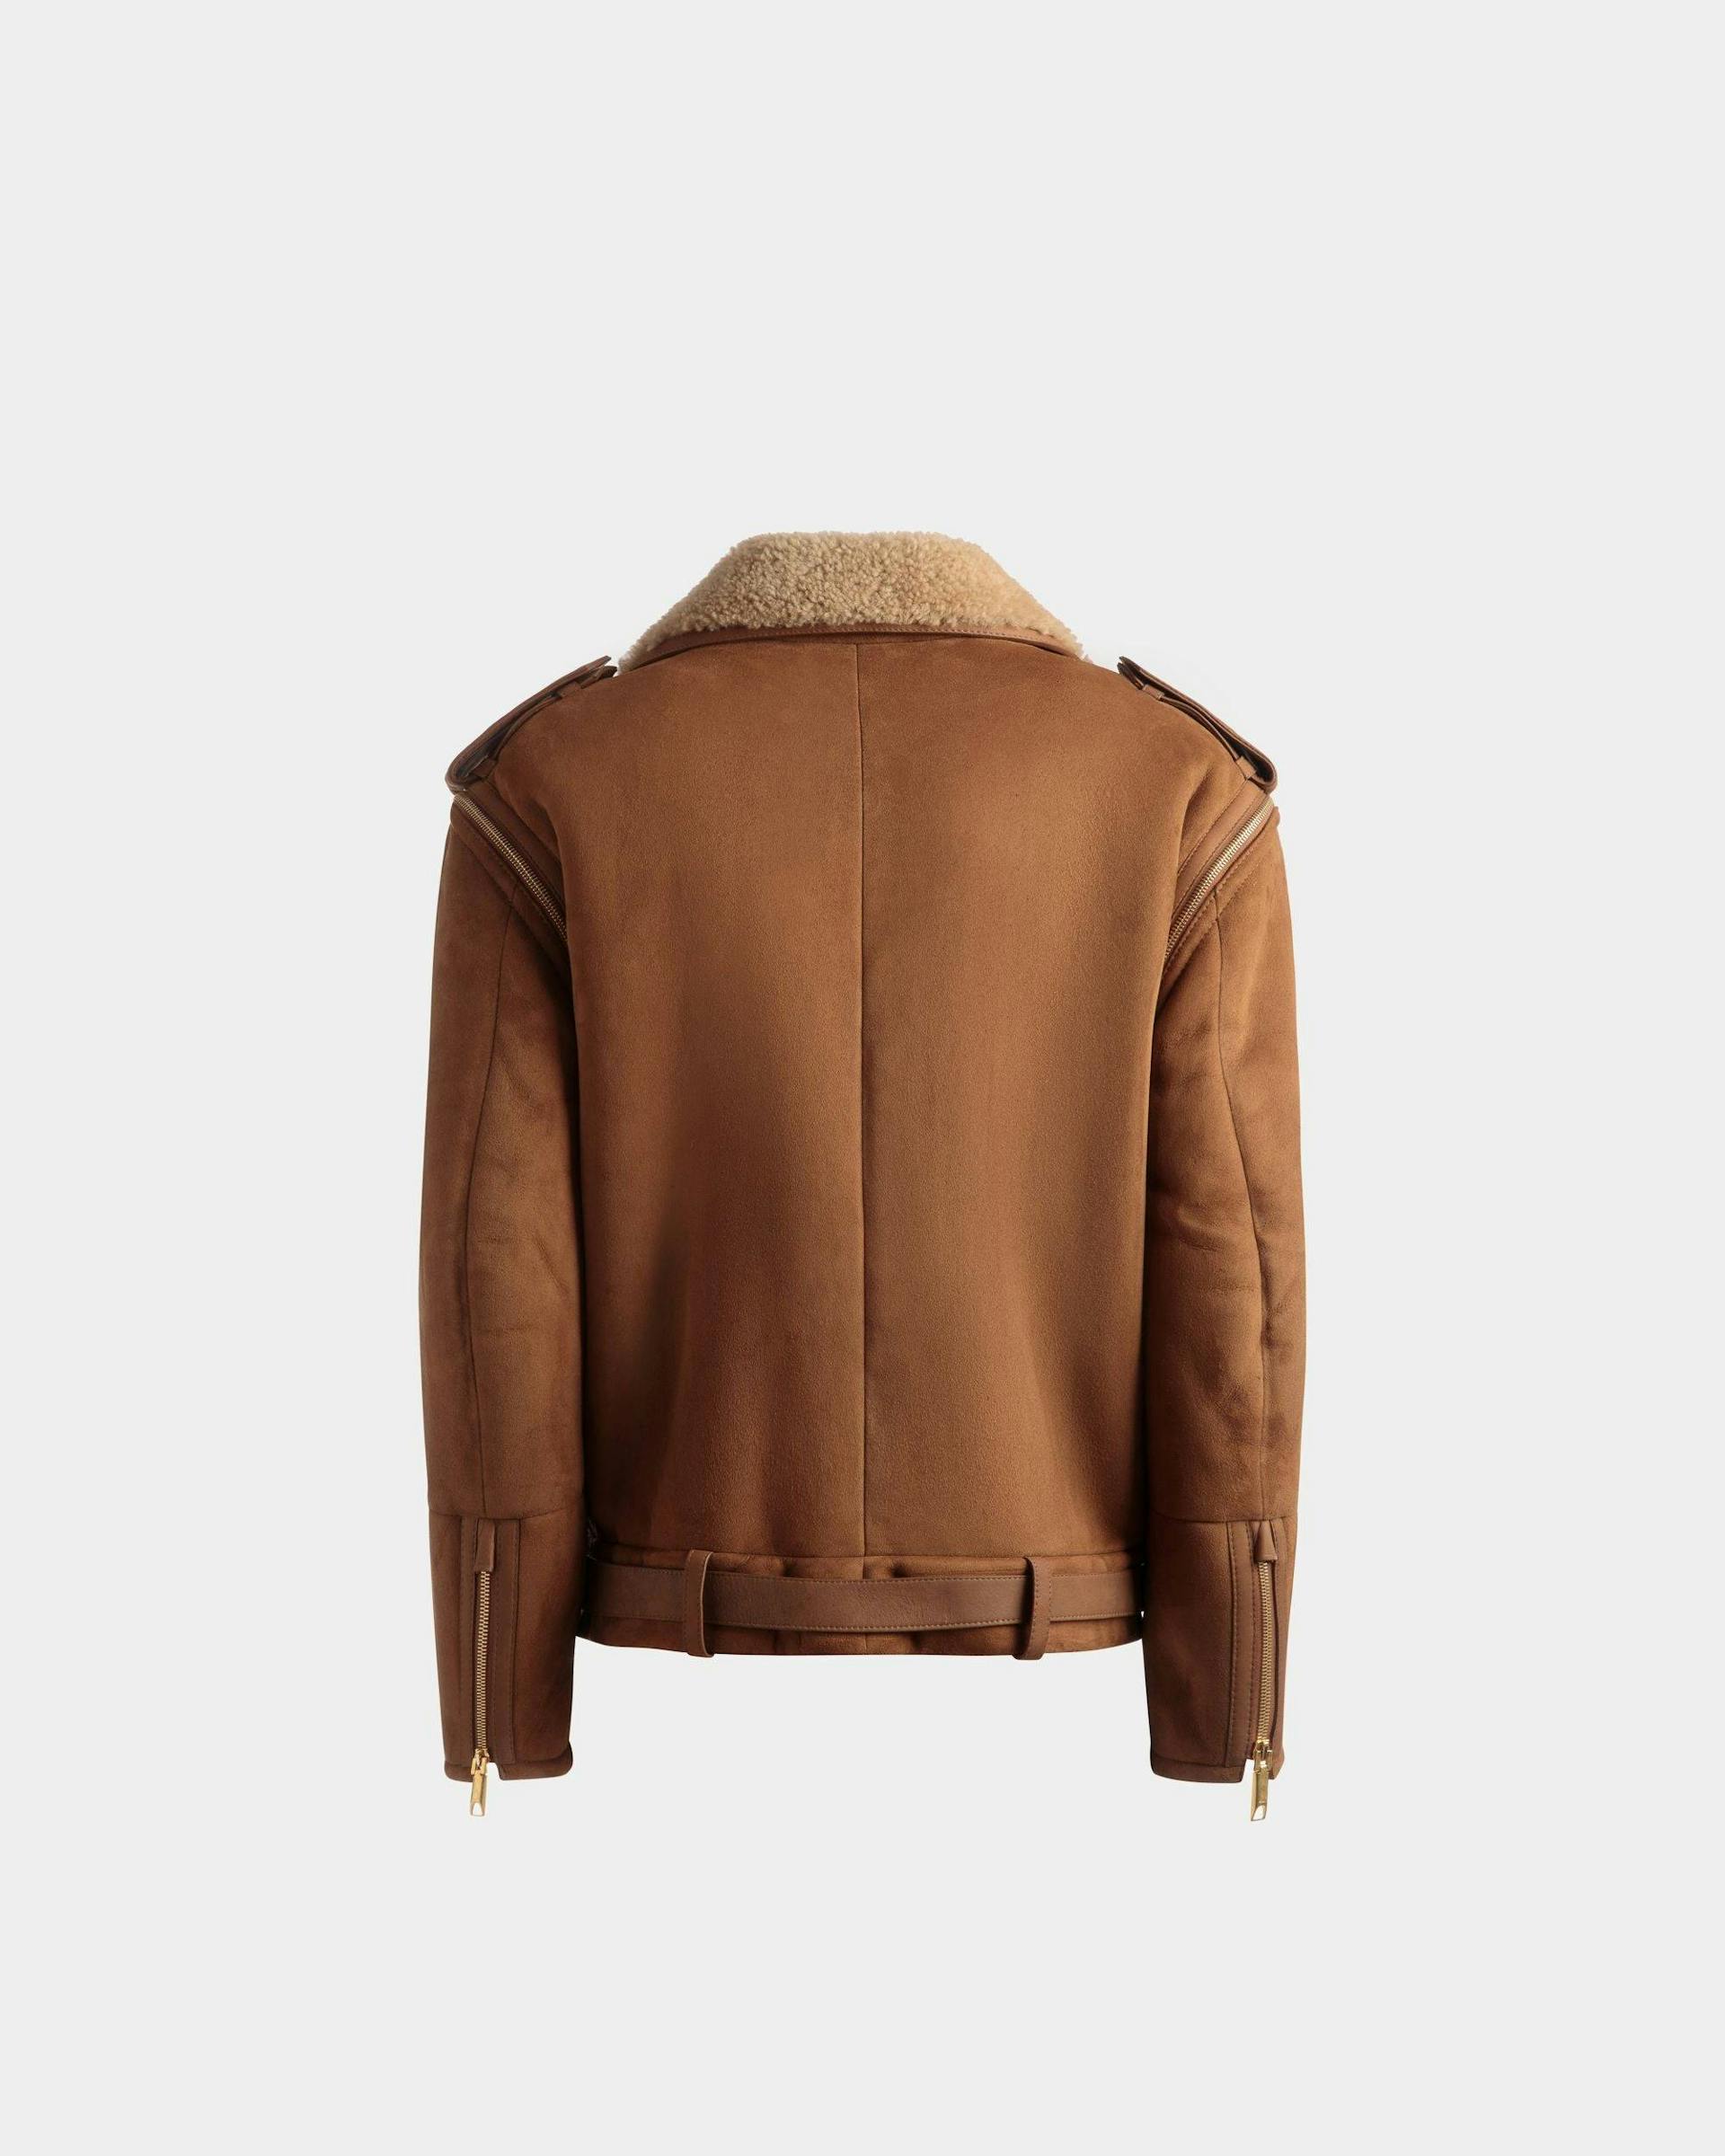 Women's Double-Breasted Shearling Jacket In Brown Suede | Bally | Still Life Back